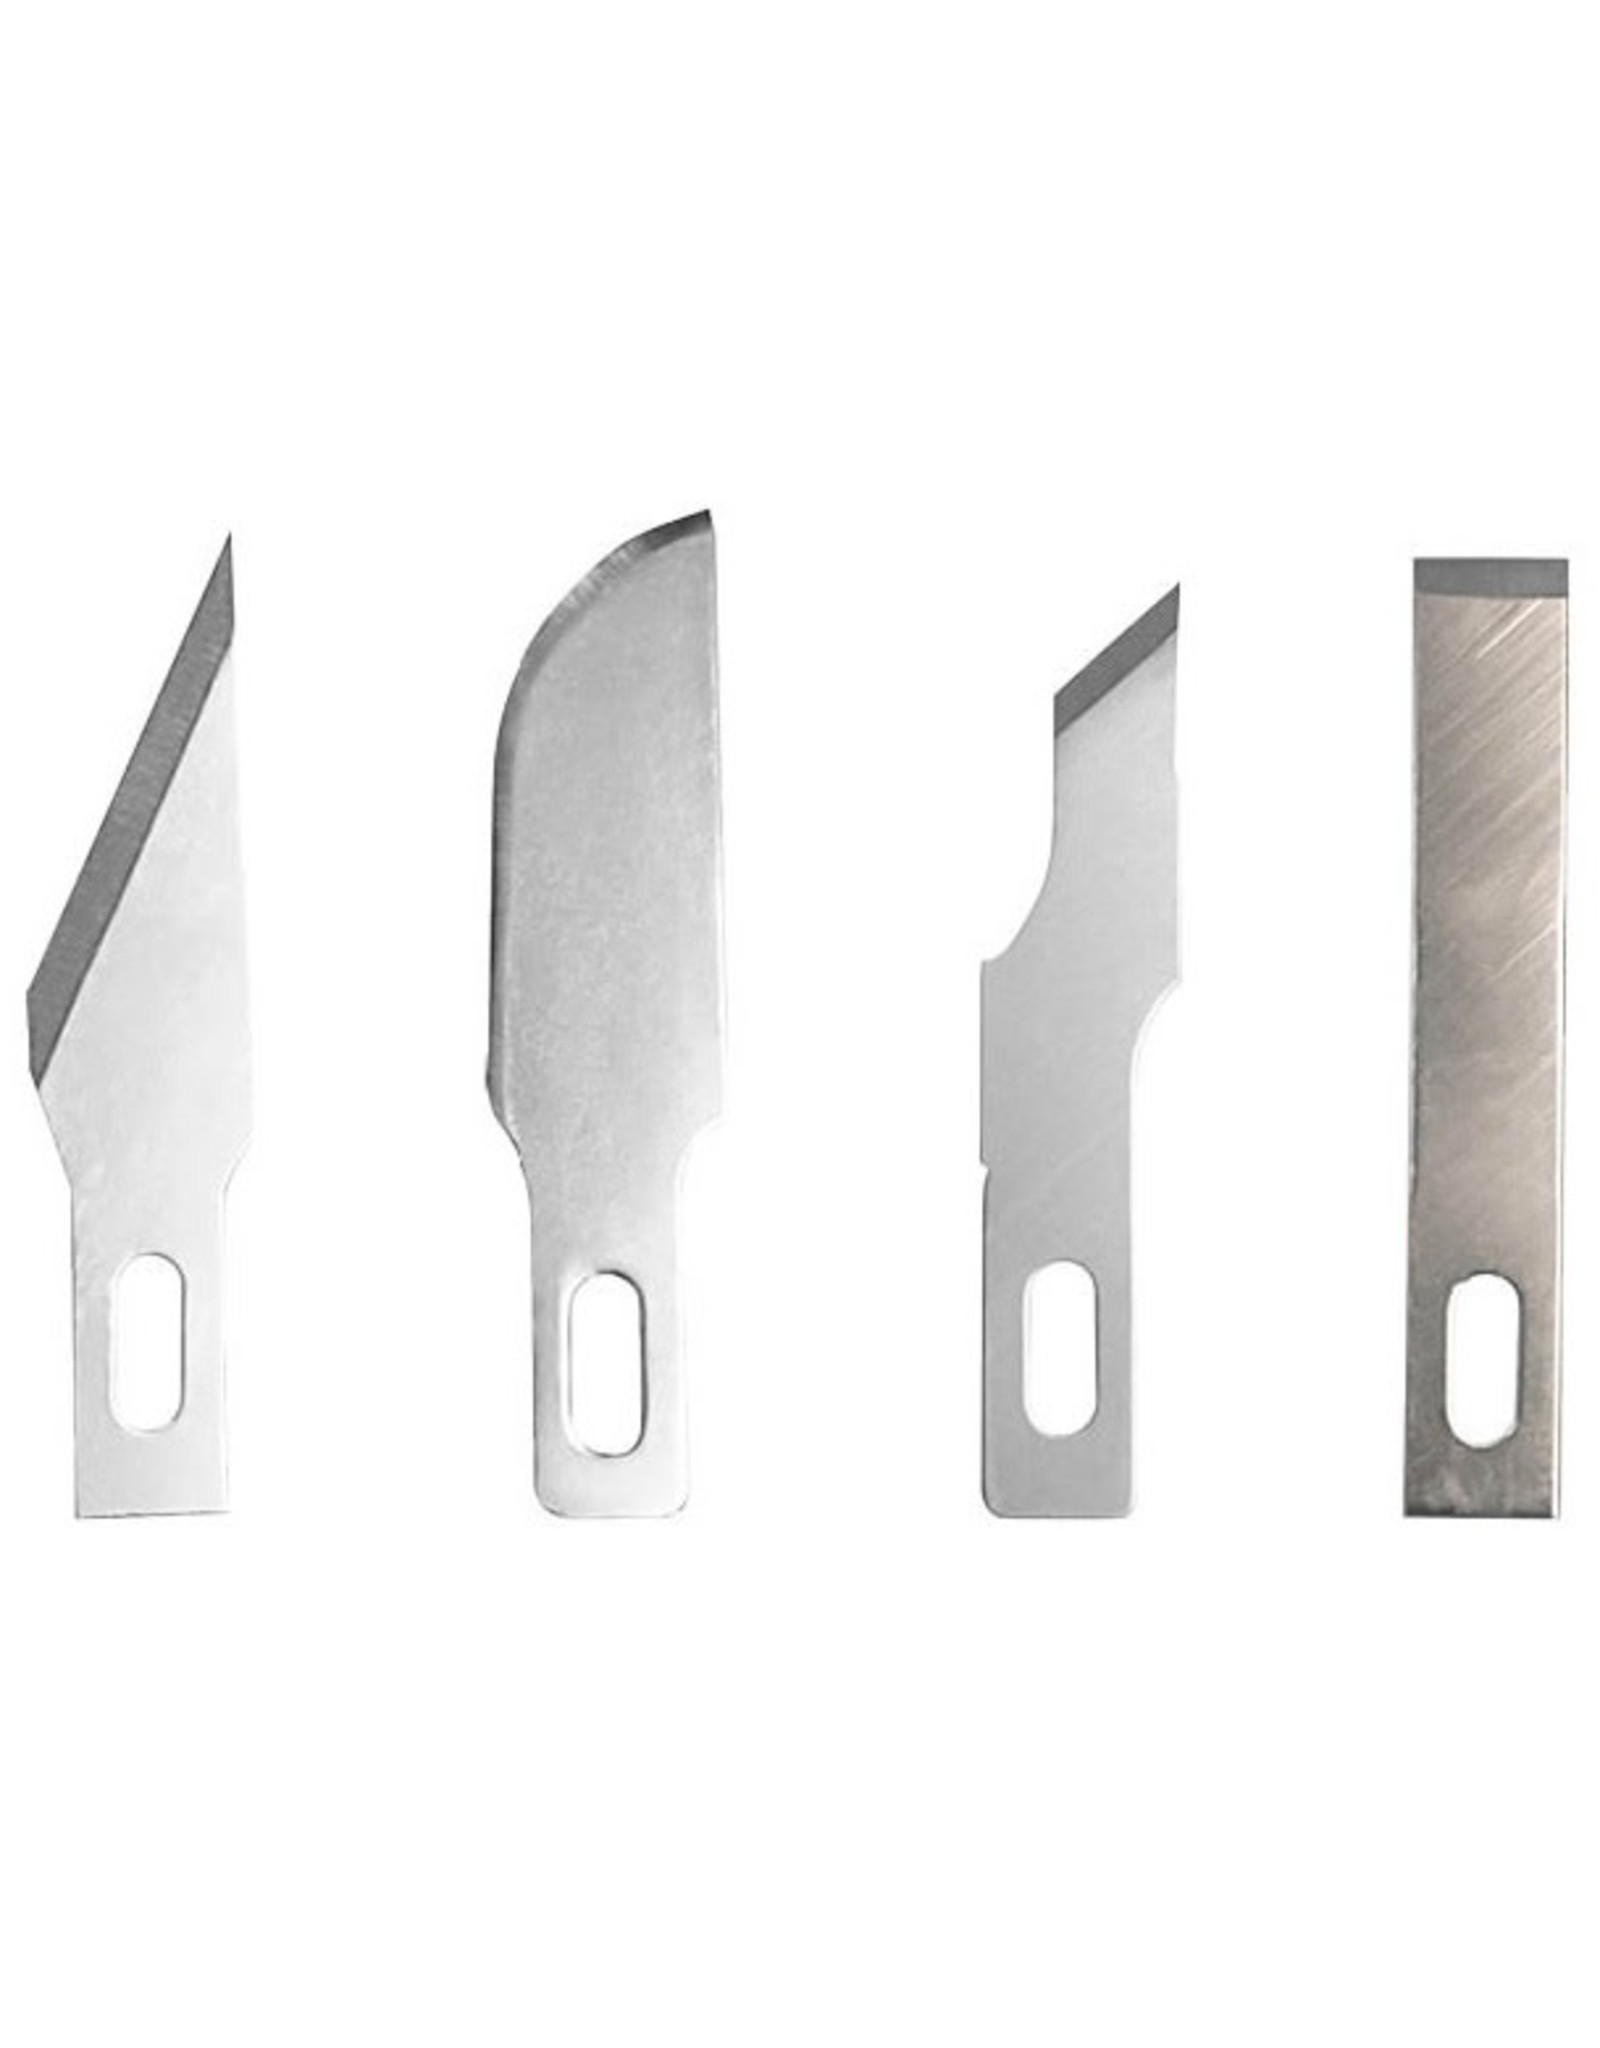 Vallejo: Assorted Blades For Knife #1 5ct